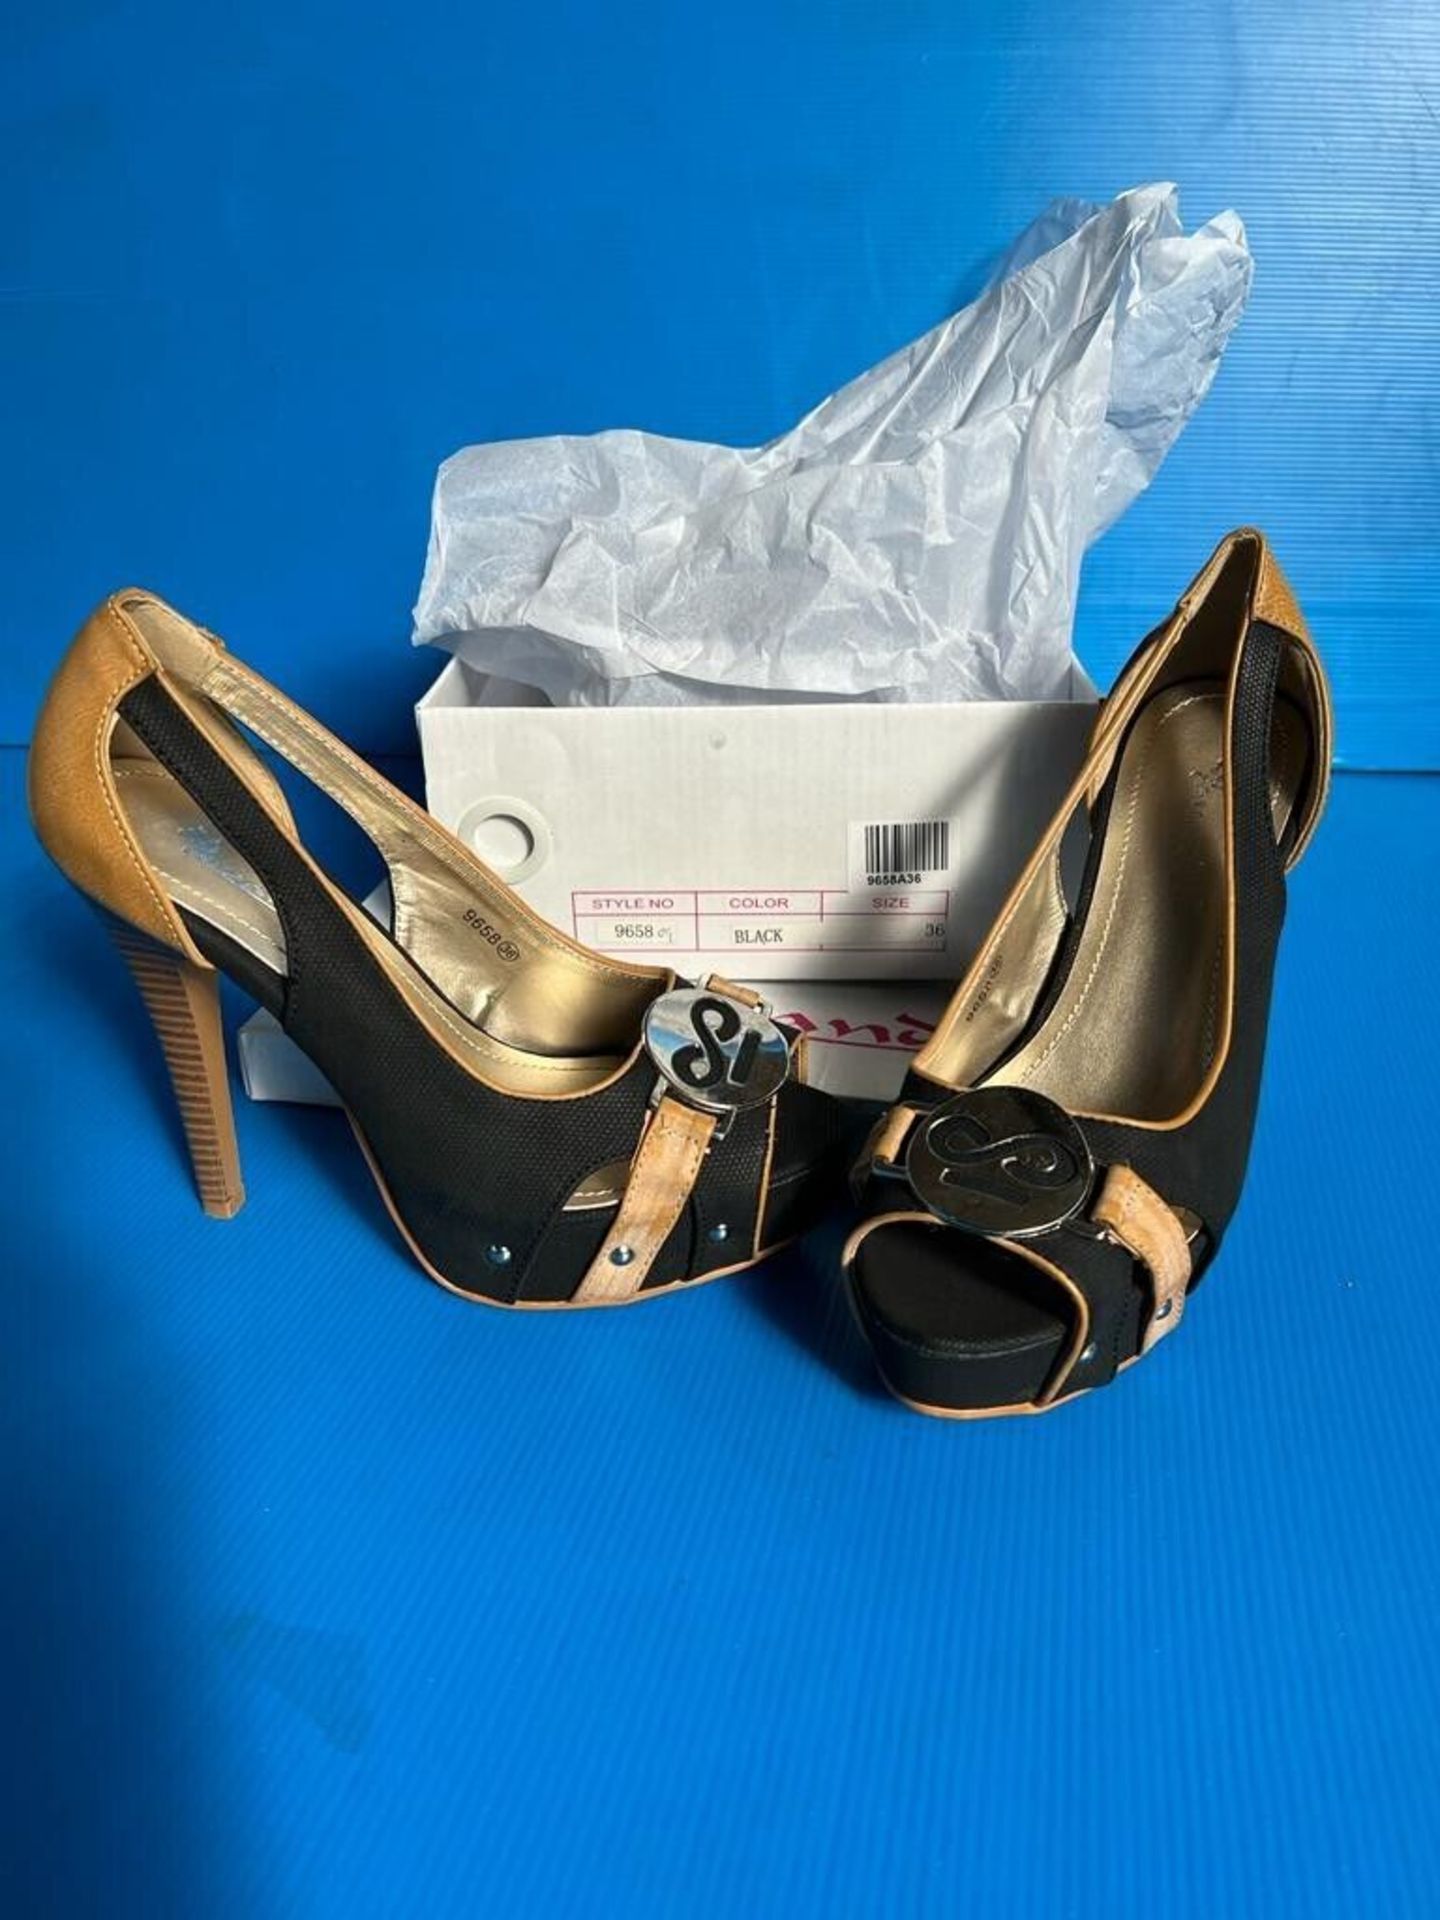 X50 BRAND NEW PAIRS WOMENS HIGH HEELS - MIXED STYLES AND SIZES RRP £1500 - Image 5 of 14